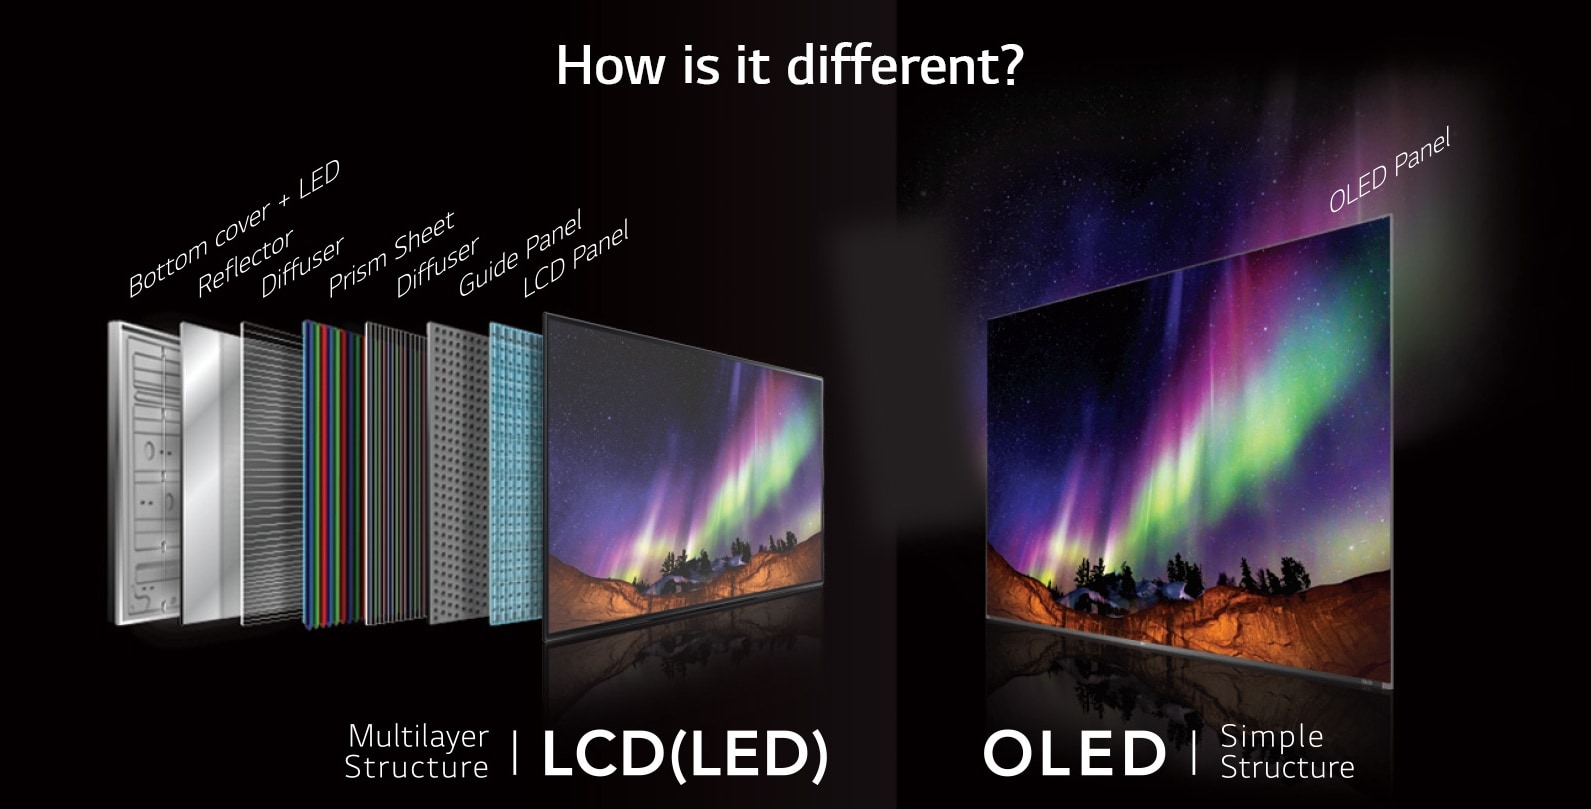 What is an OLED?